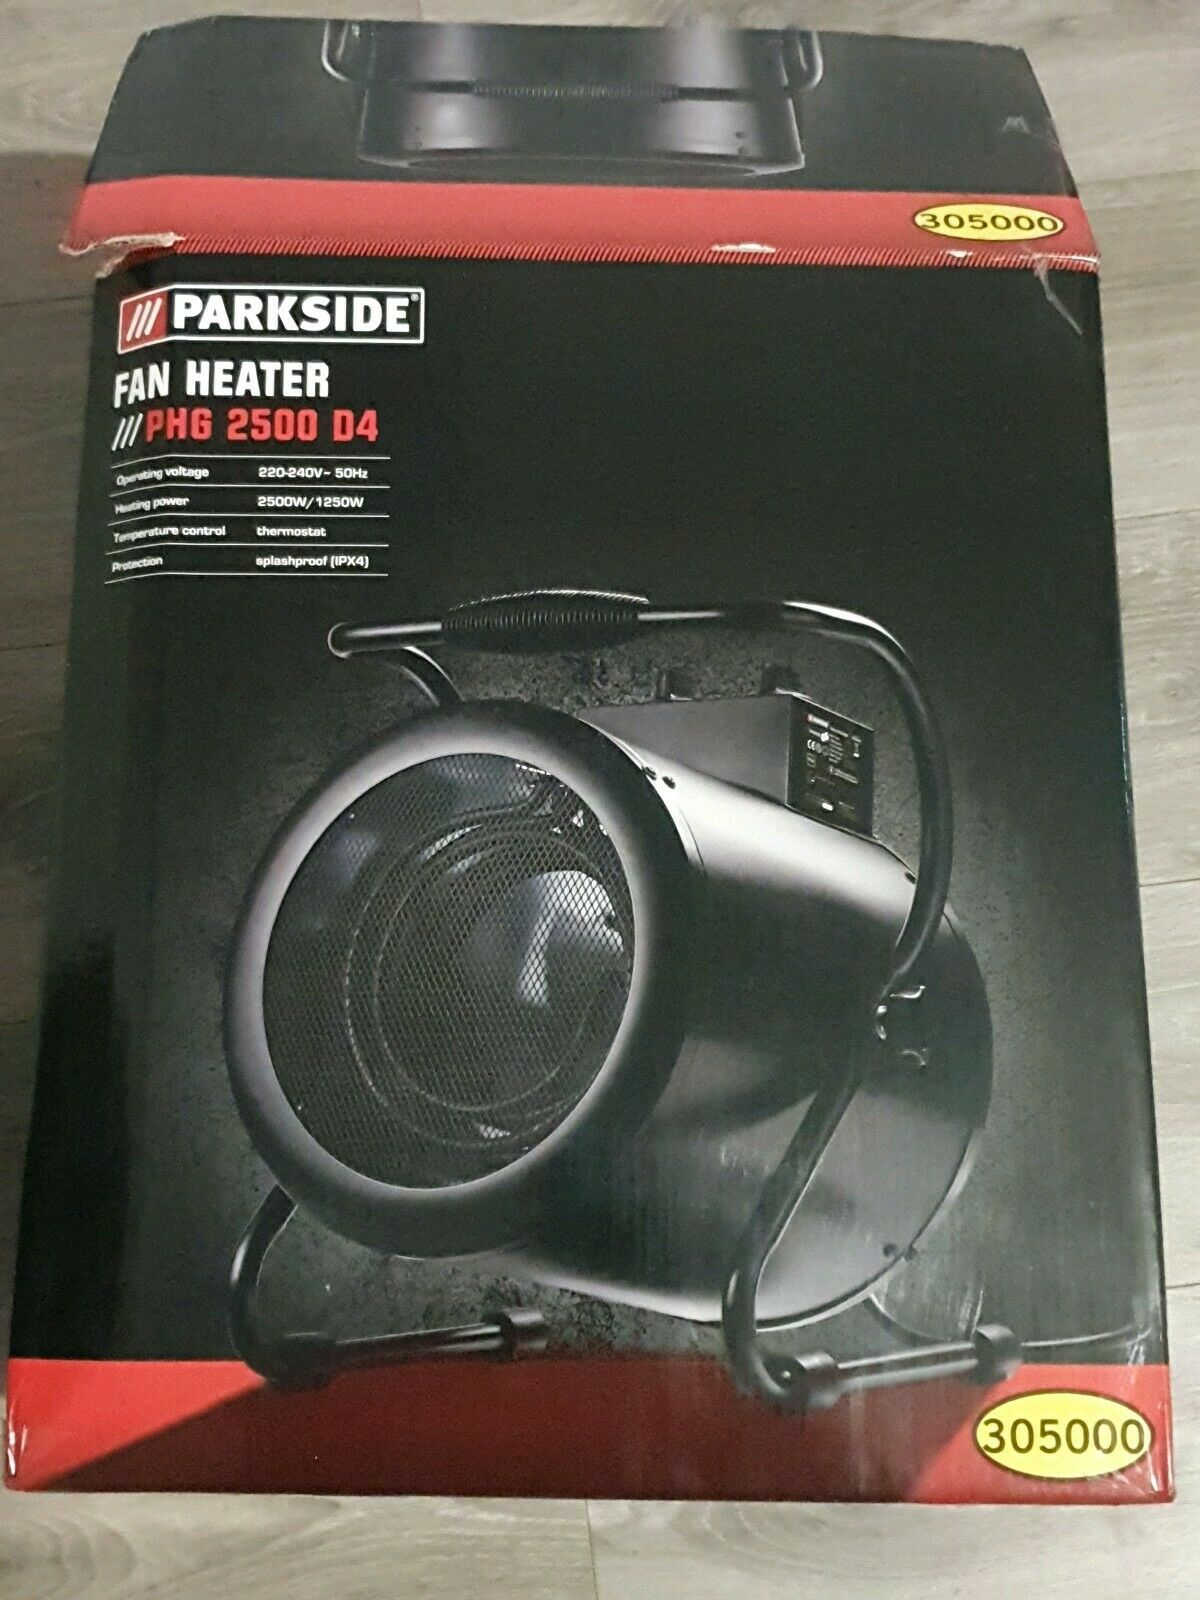 Parkside Very Large Powerful 2500w Fan Heater Phg 2500 D4 With Climate Control regarding measurements 1200 X 1600